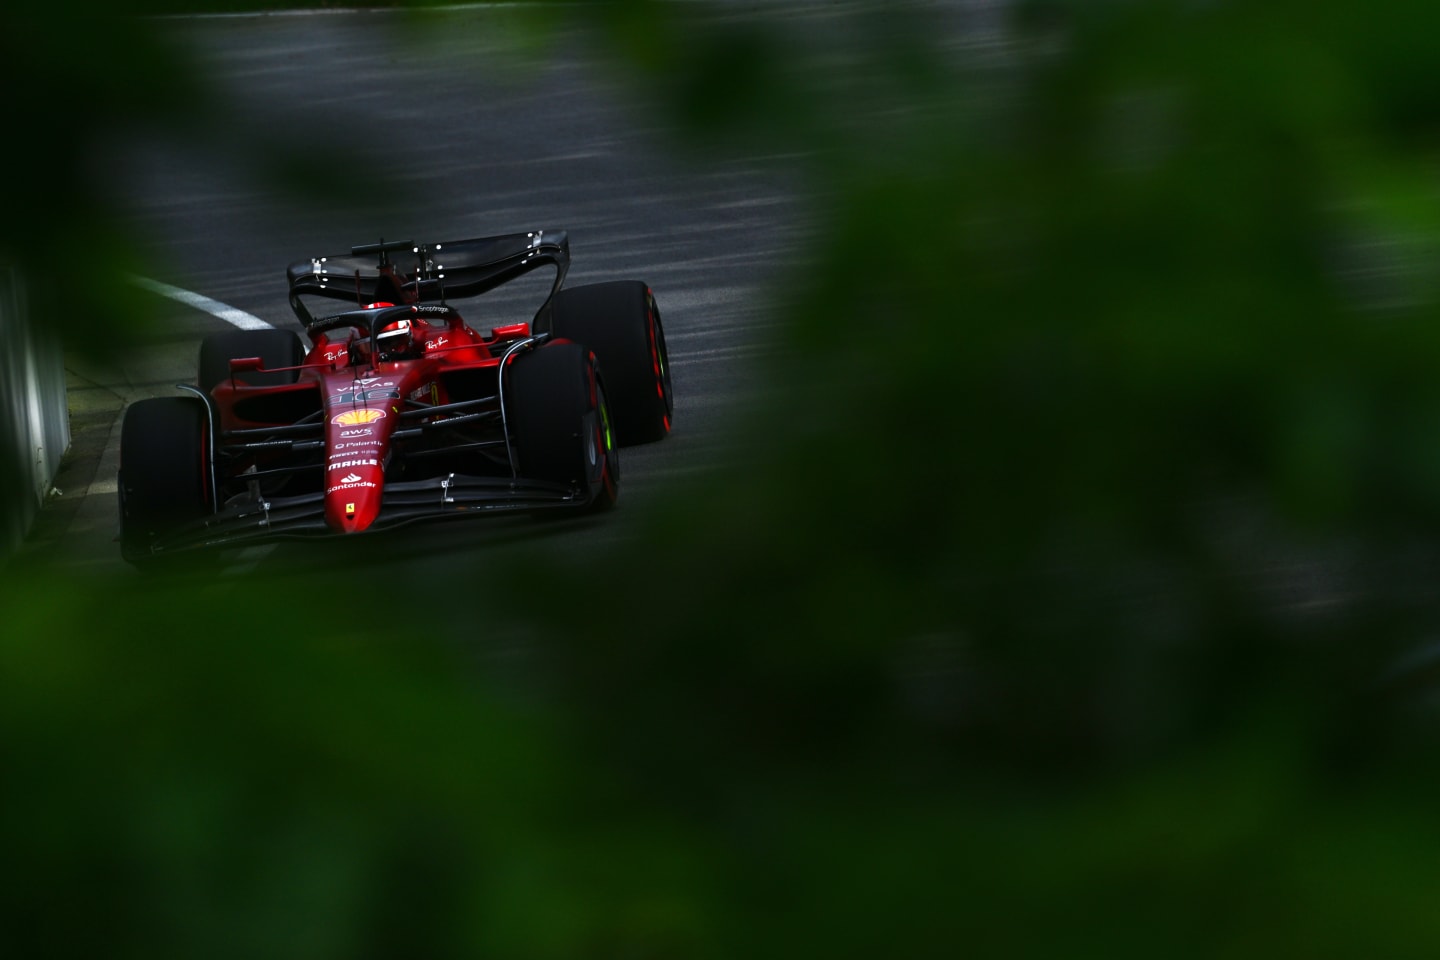 MONTREAL, QUEBEC - JUNE 17: Charles Leclerc of Monaco driving the (16) Ferrari F1-75 on track during practice ahead of the F1 Grand Prix of Canada at Circuit Gilles Villeneuve on June 17, 2022 in Montreal, Quebec. (Photo by Clive Mason/Getty Images)